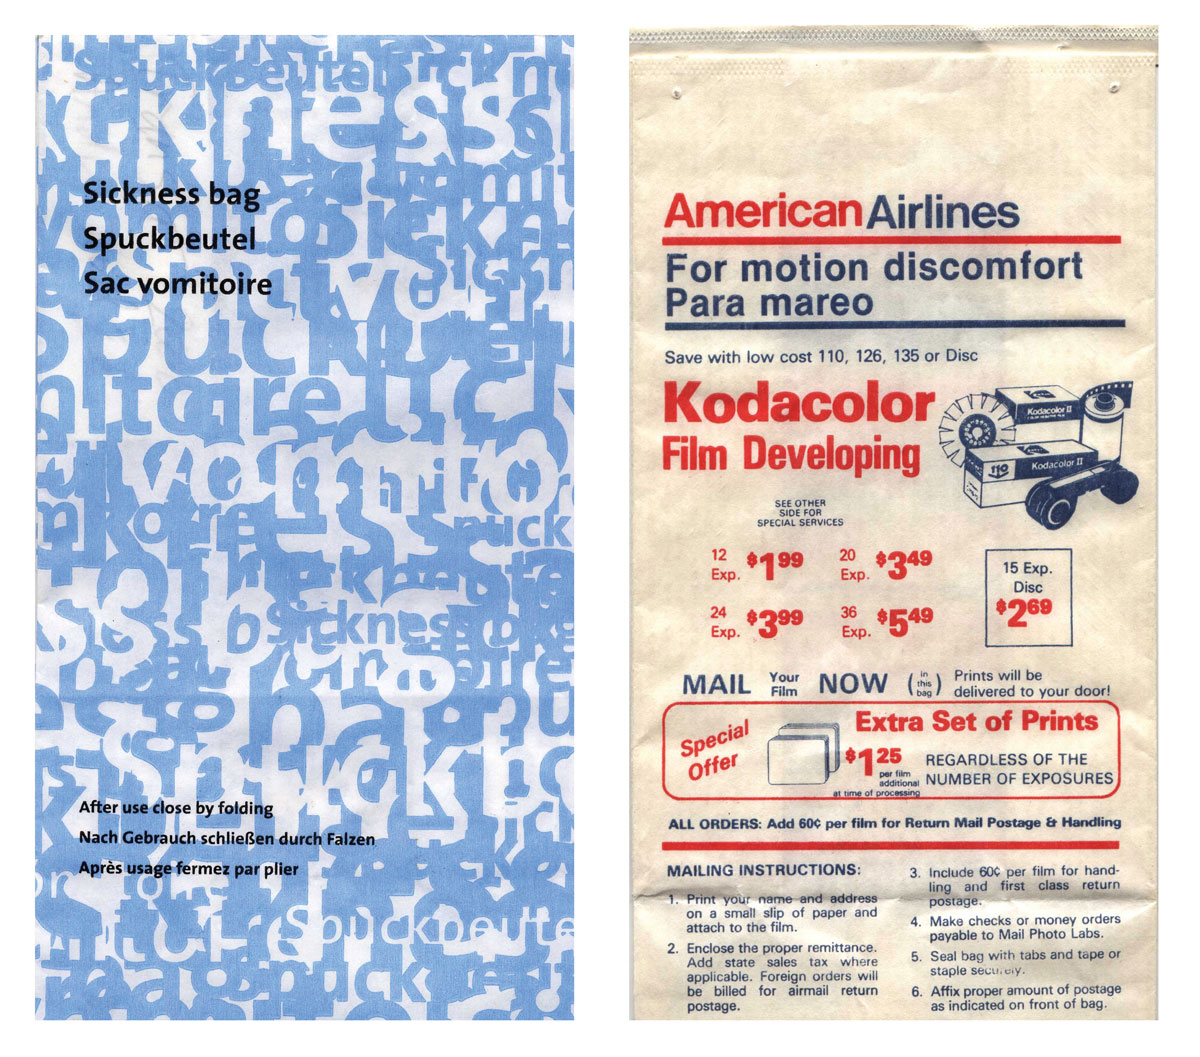 A photograph of a blue airsickness bag to the left of a red and cream colored Kodacolor branded airsickness bag.